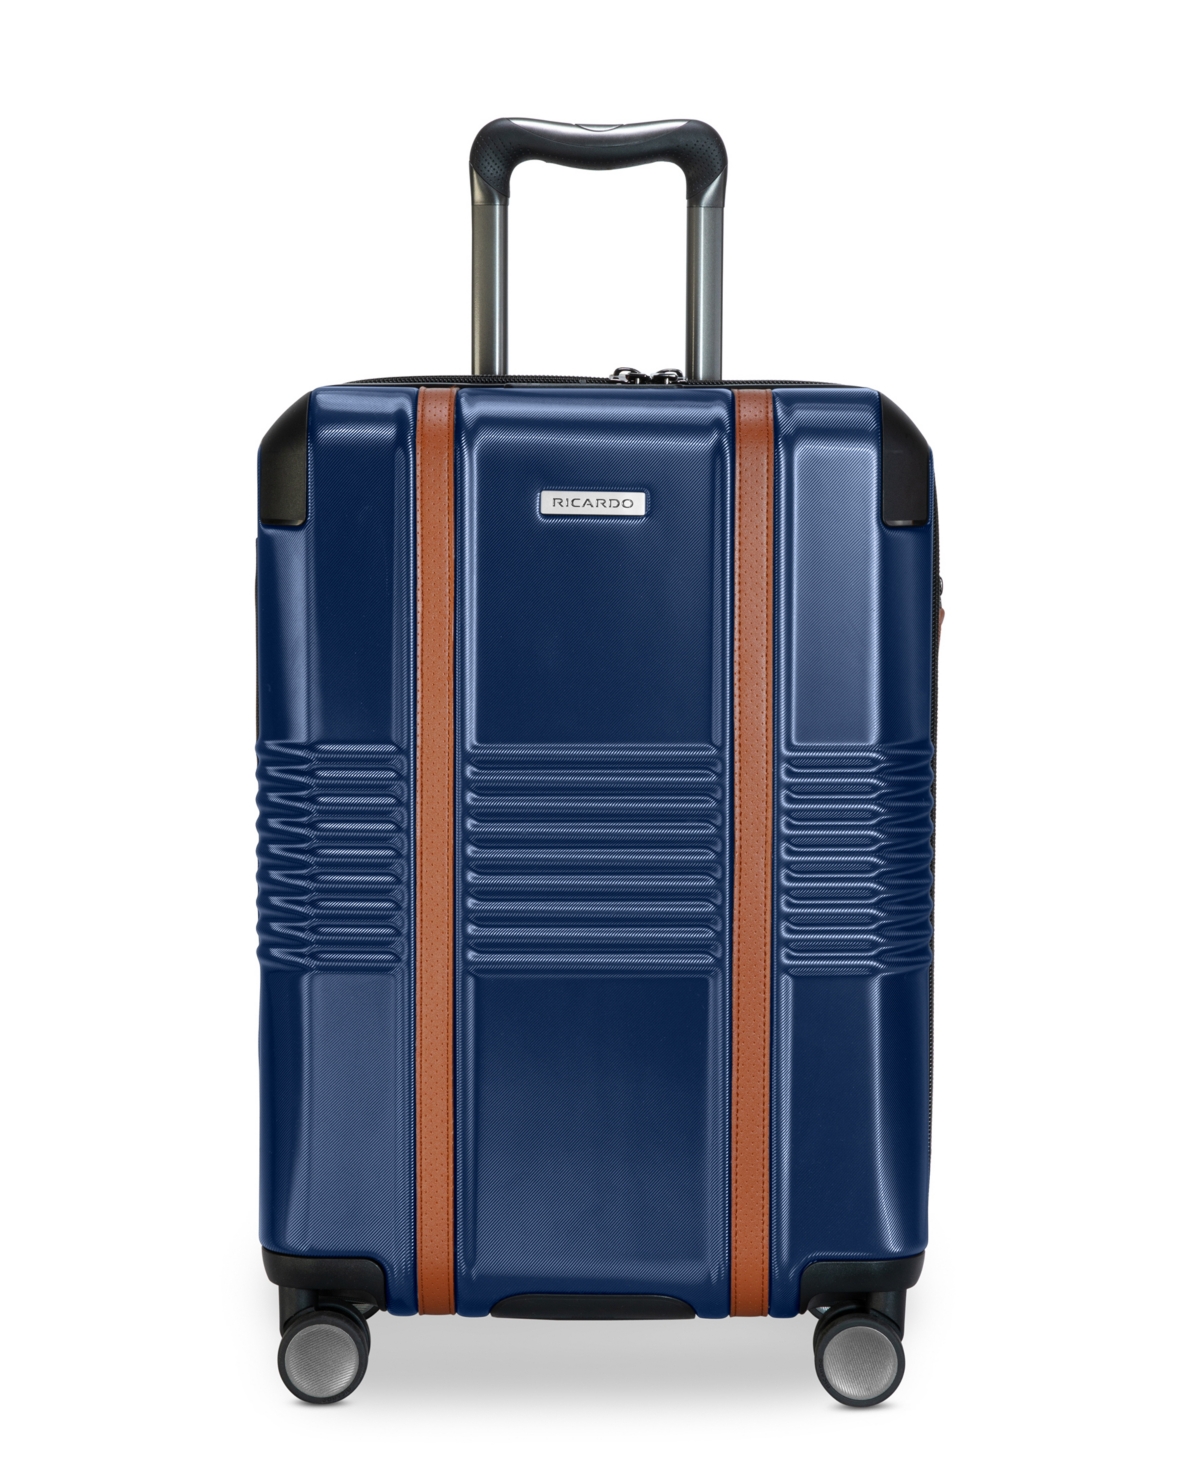 Ricardo Cabrillo 3.0 Hardside 21" Carry-on Spinner Suitcase In Ocean Blue